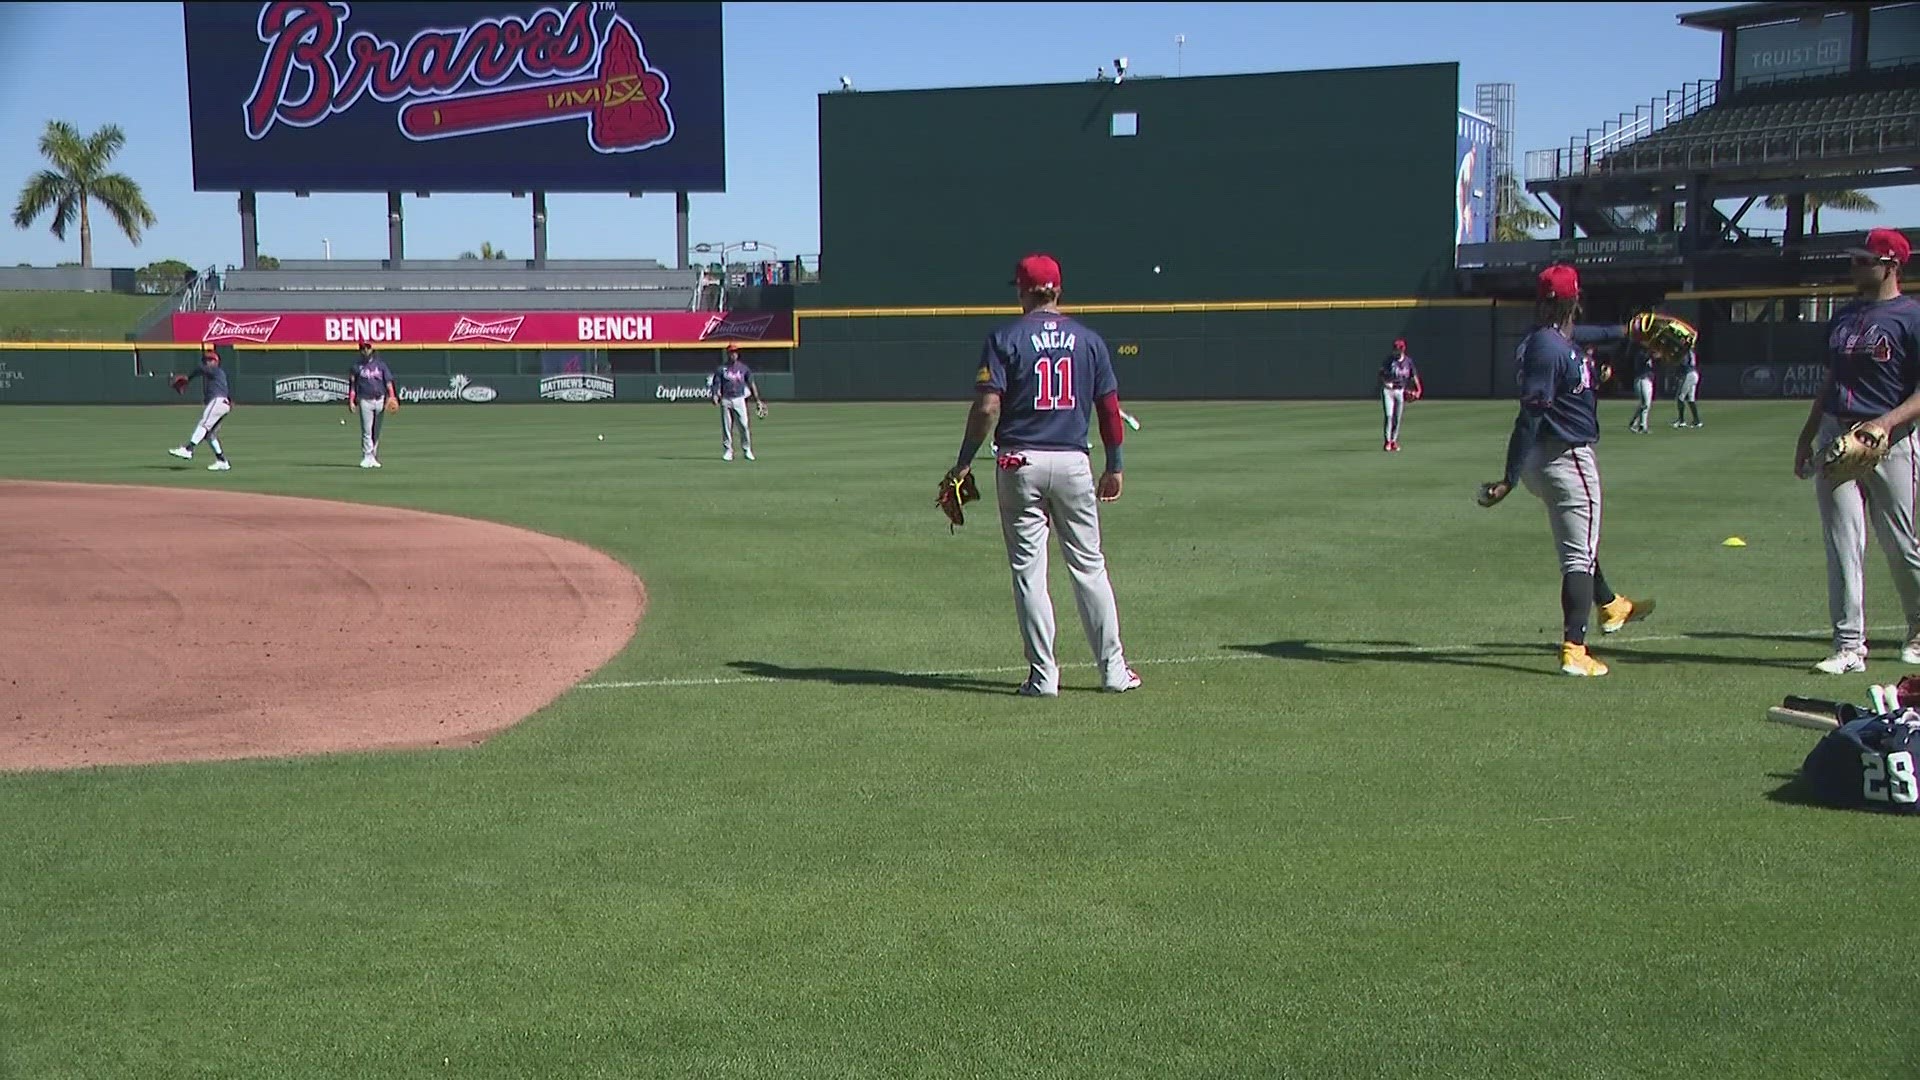 The Braves are gearing up for their first spring training game.